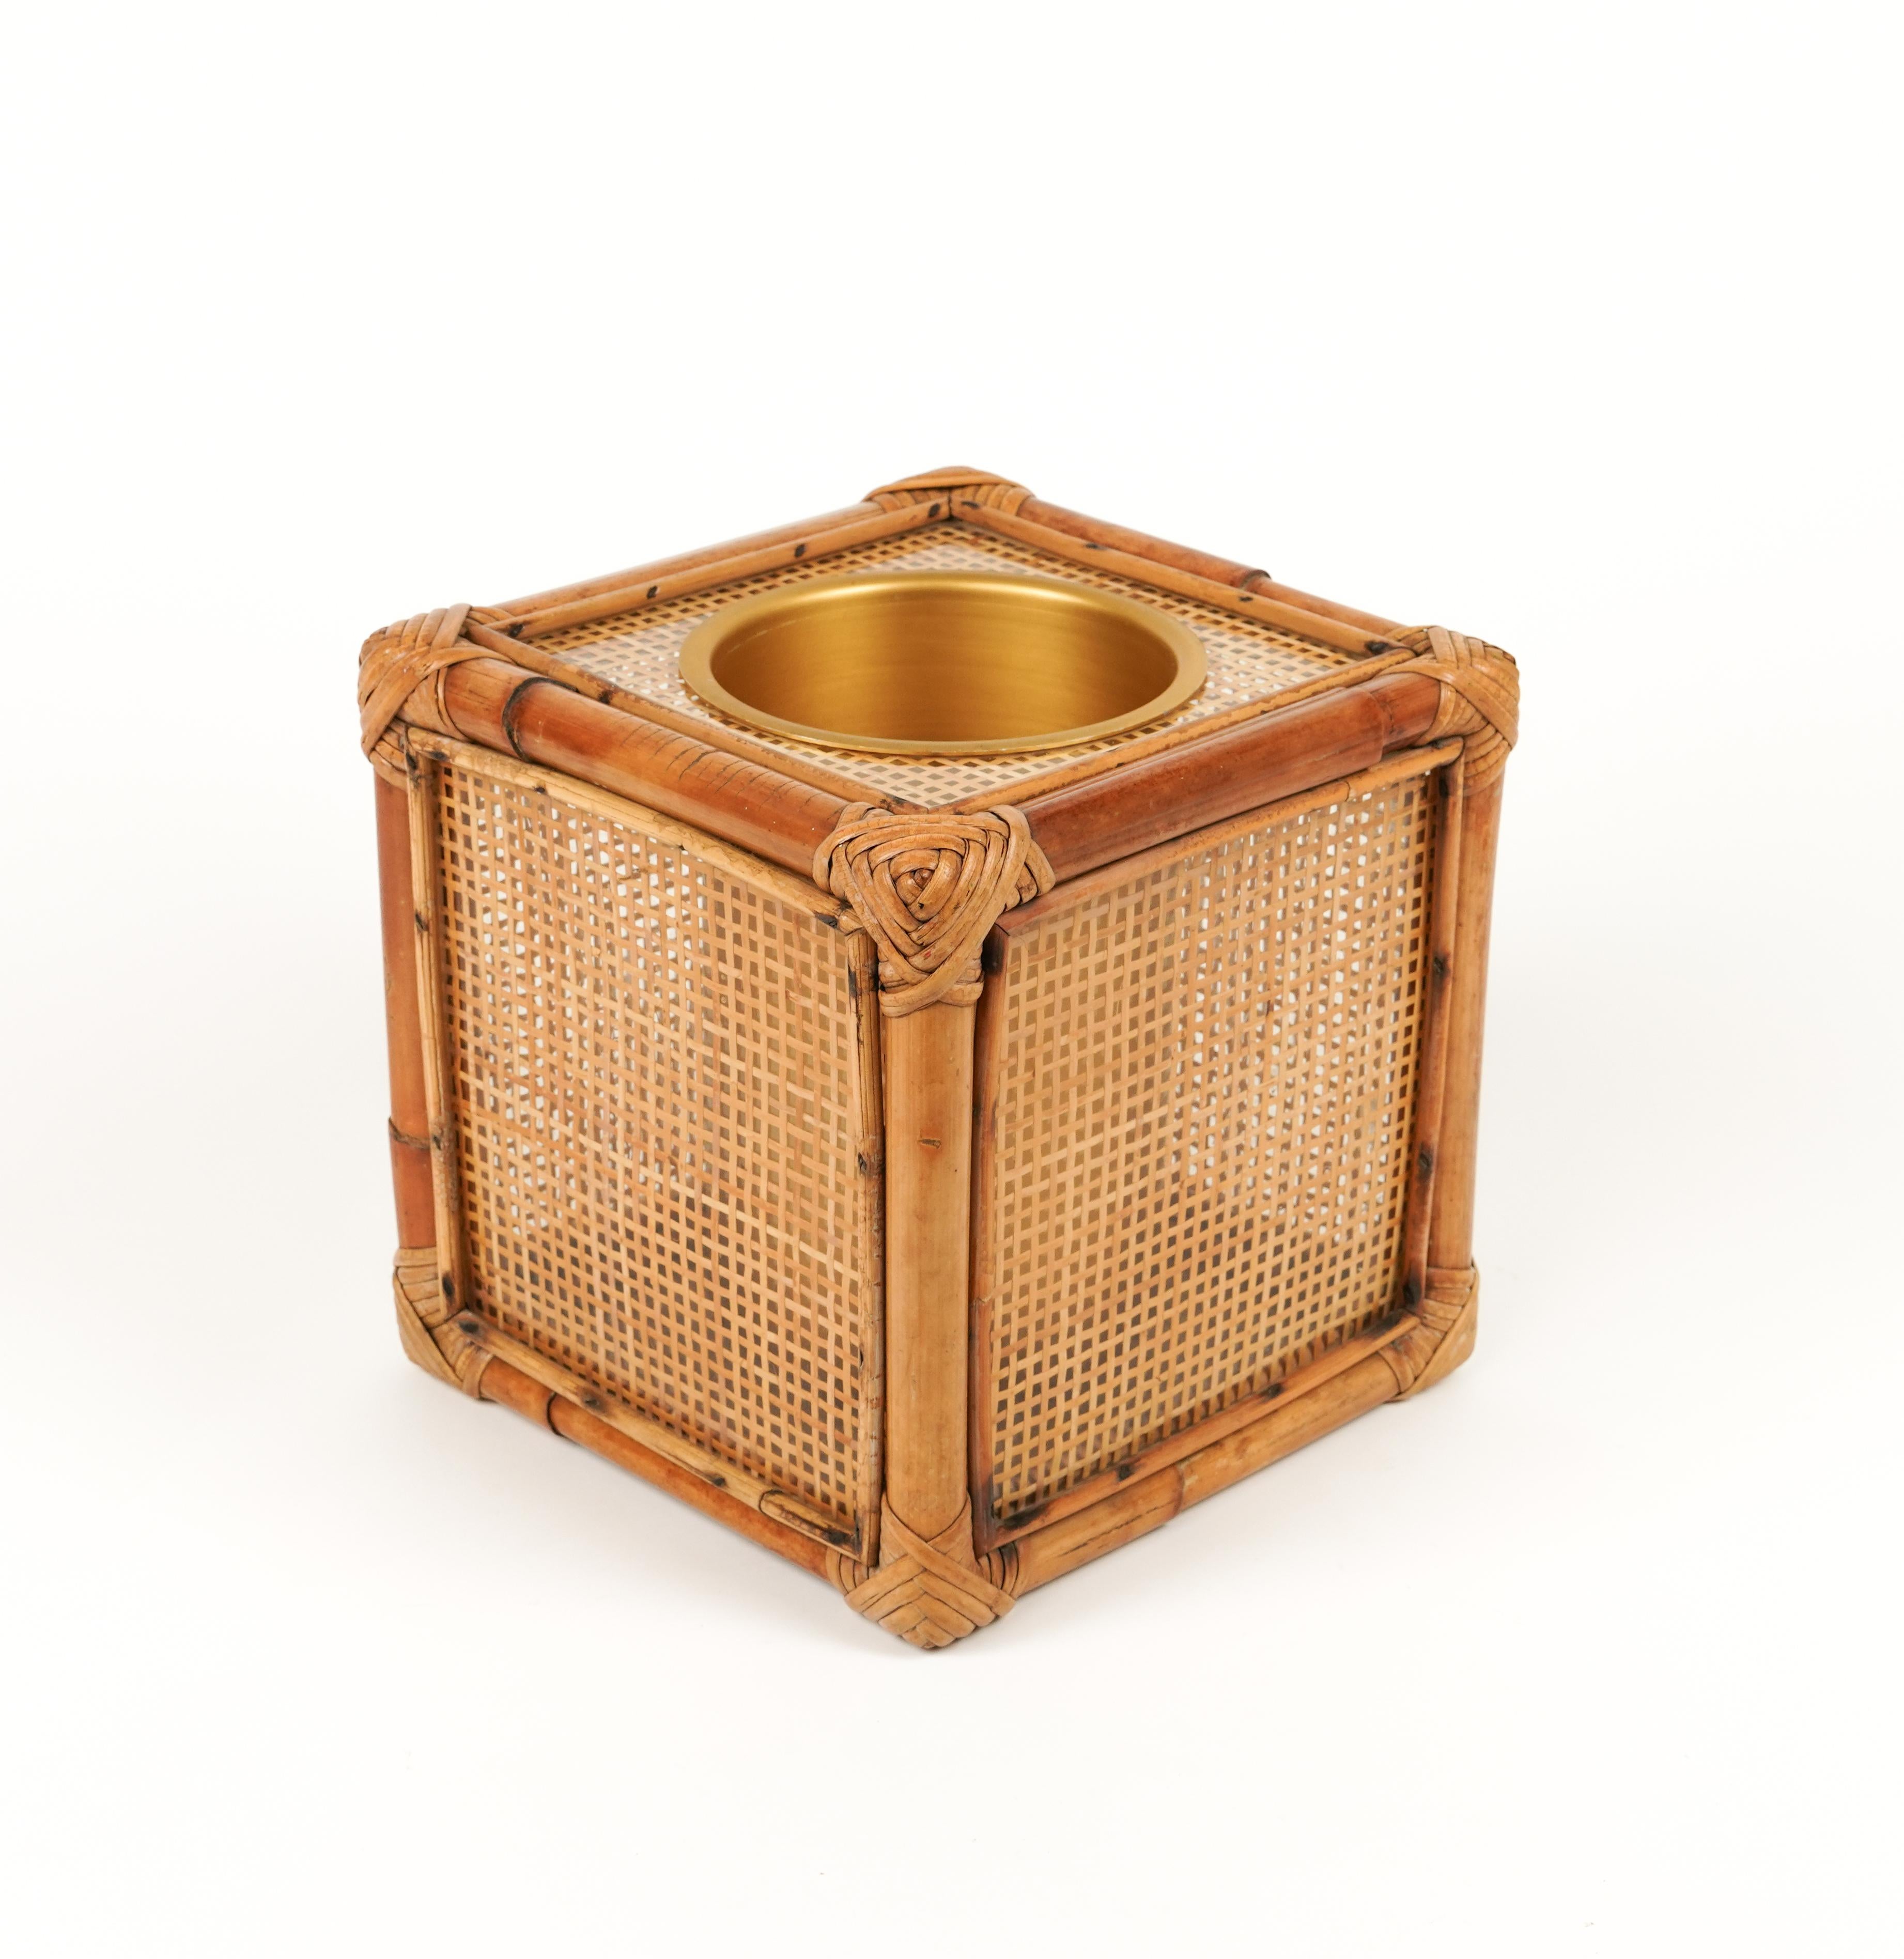 Midcentury cube barware ice bucket in bamboo, rattan and lucite in the style of Christian Dior Home.   

Made in Italy in the 1970s.